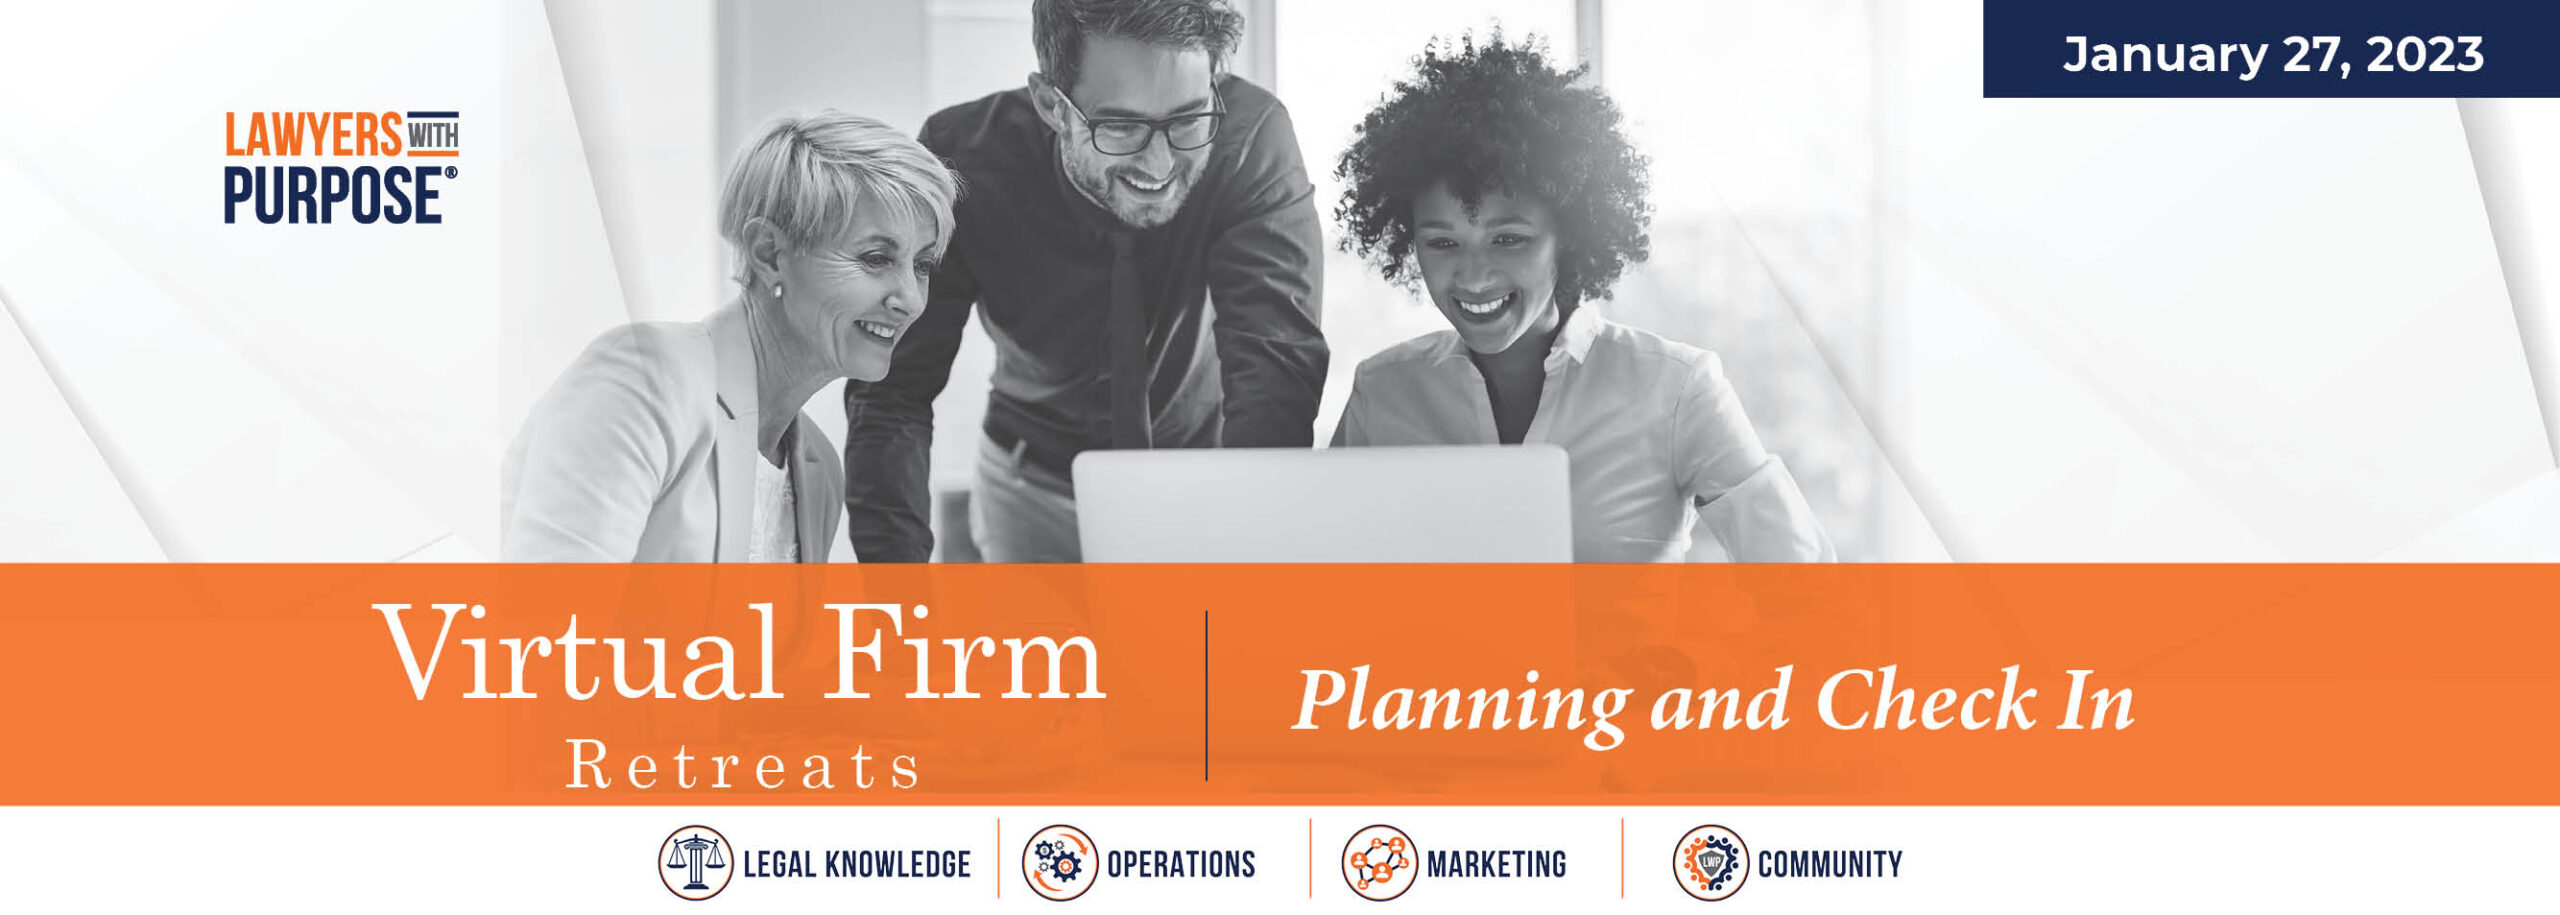 Virtual Firm Retreats: Planning and Check In. January 27, 2023